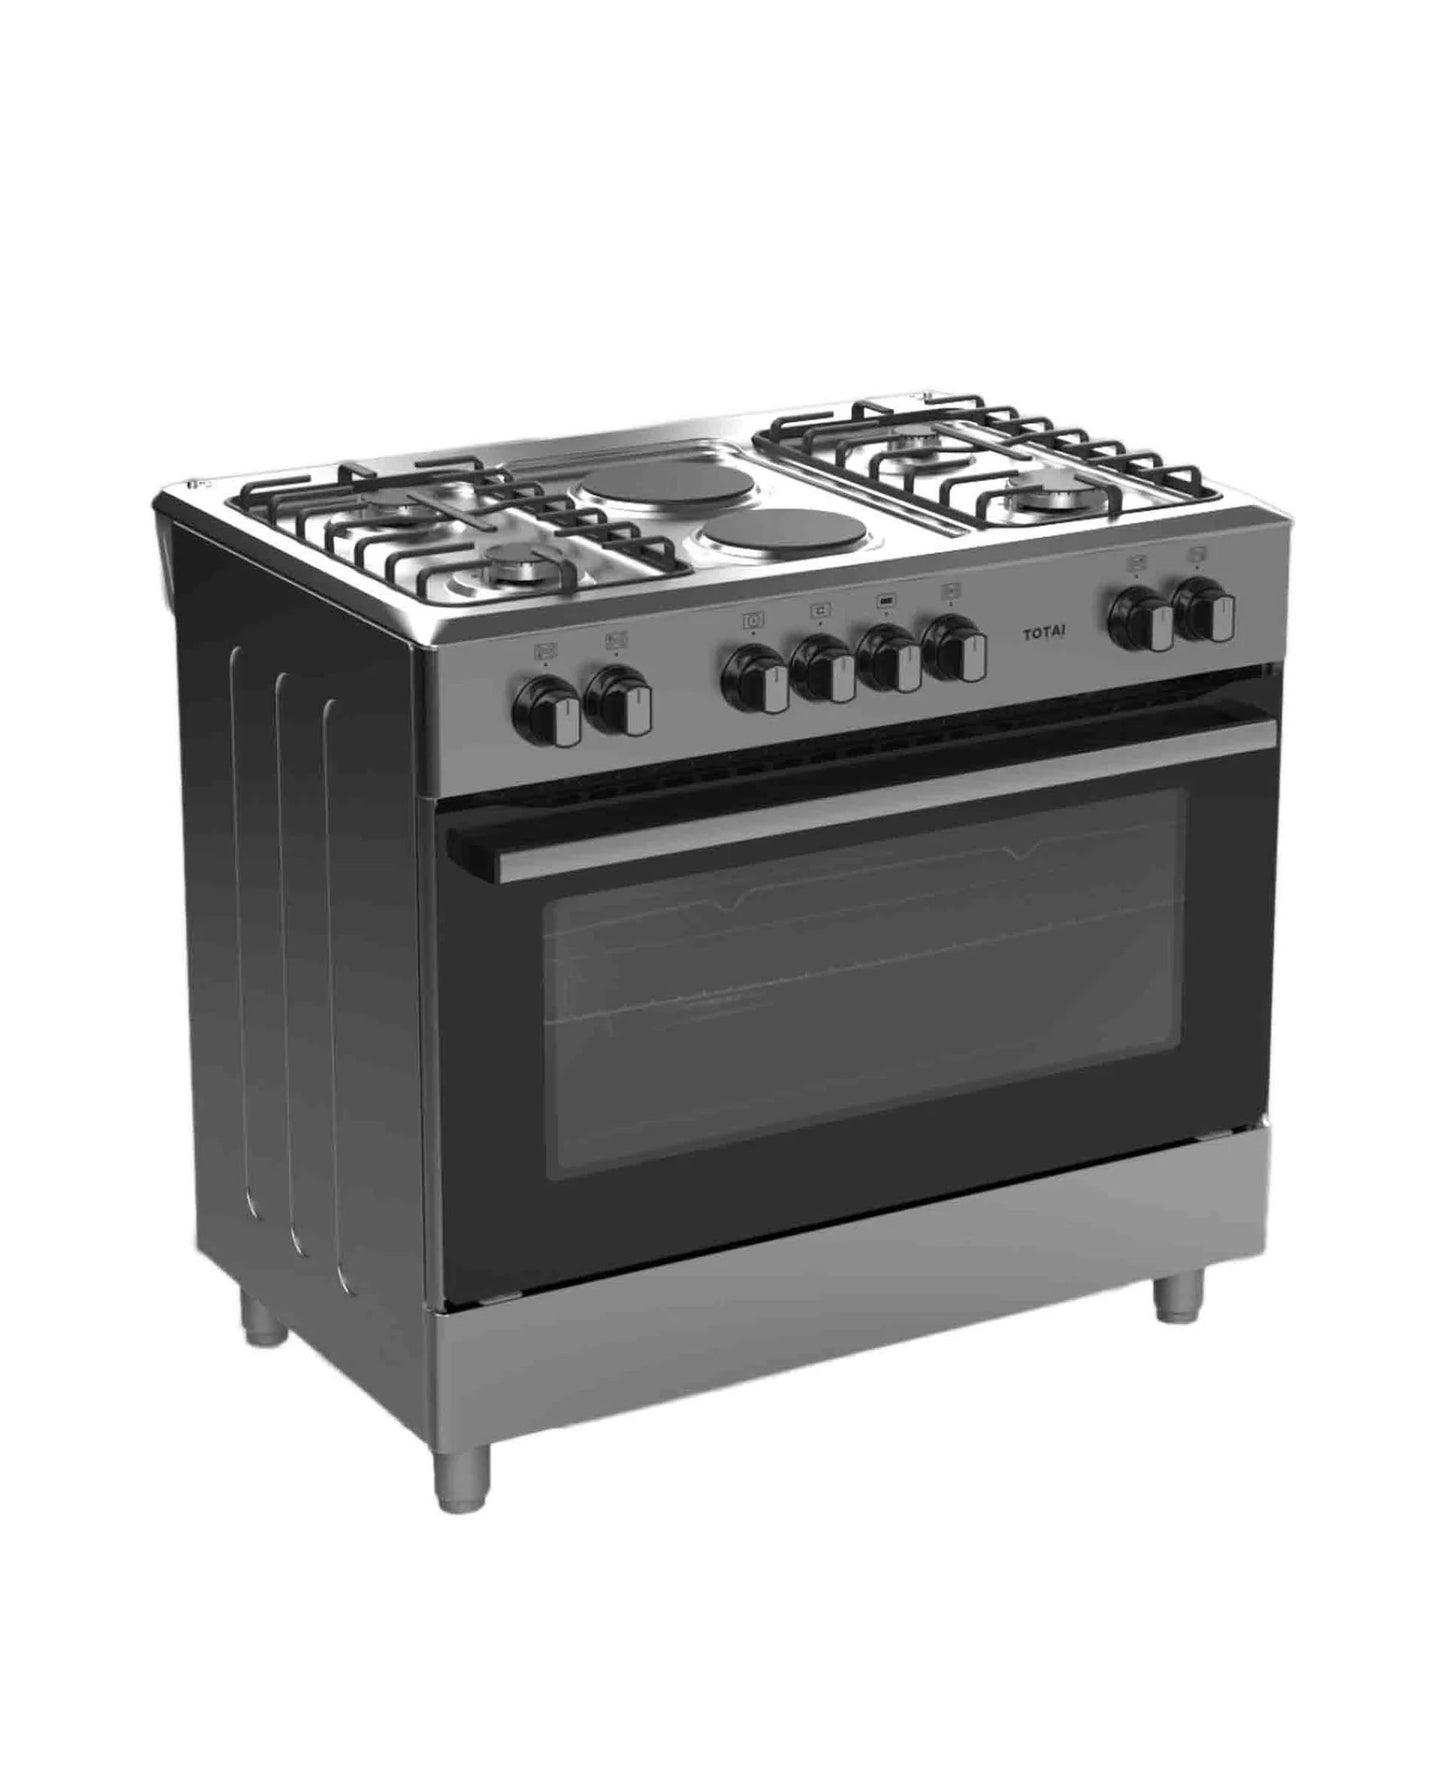 TOTAI STYLE 90CM 4 BURNER + 2 ELECTRIC PLATES WITH ELECTRIC OVEN-03/T900GE